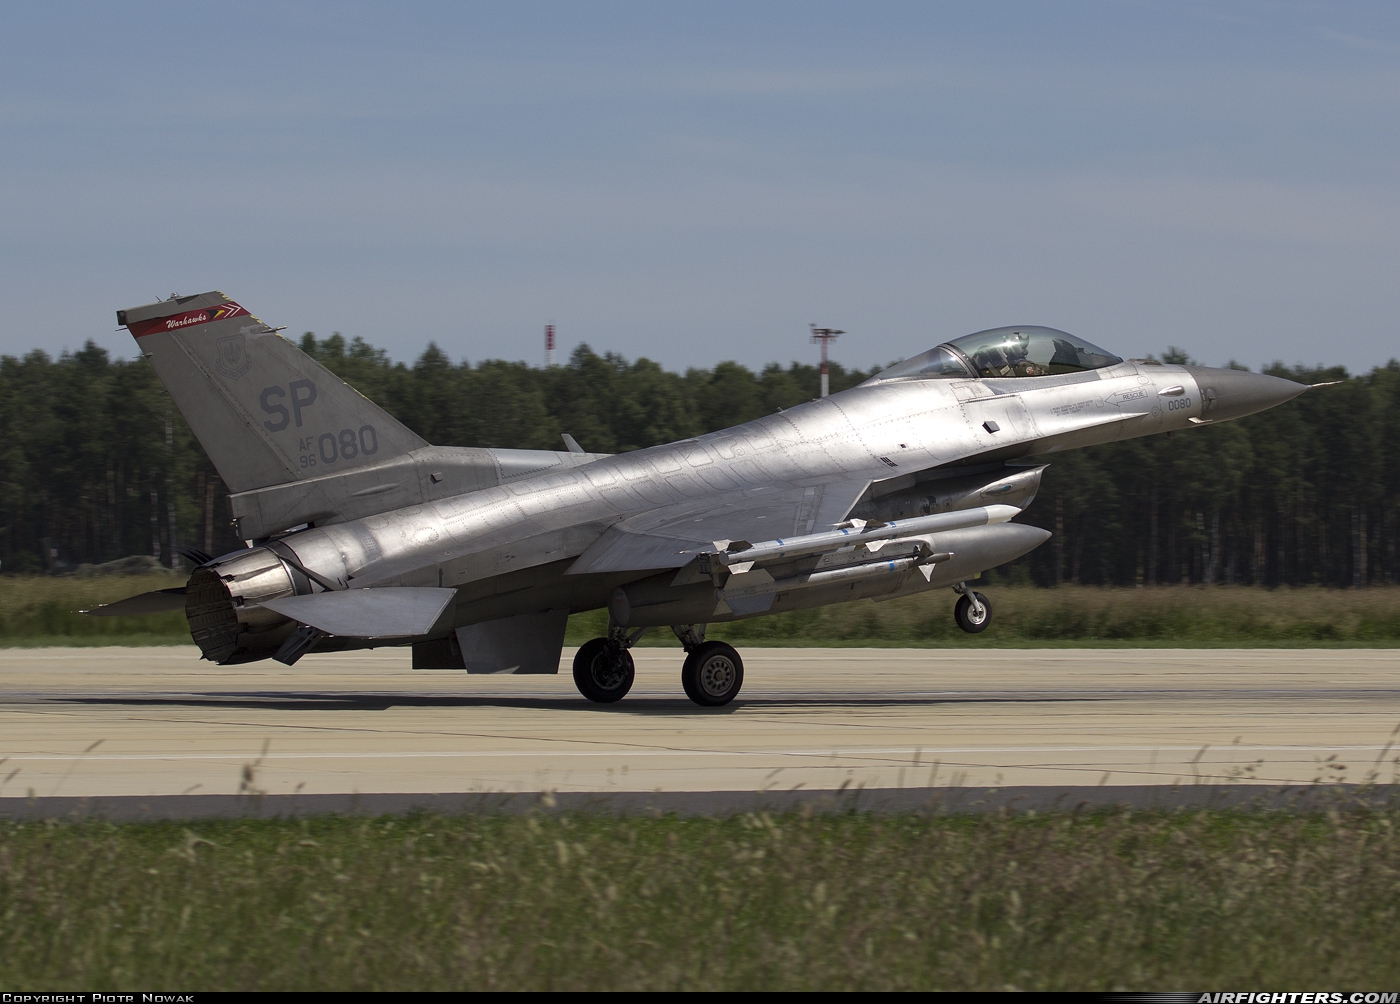 USA - Air Force General Dynamics F-16C Fighting Falcon 96-0080 at Lask (EPLK), Poland